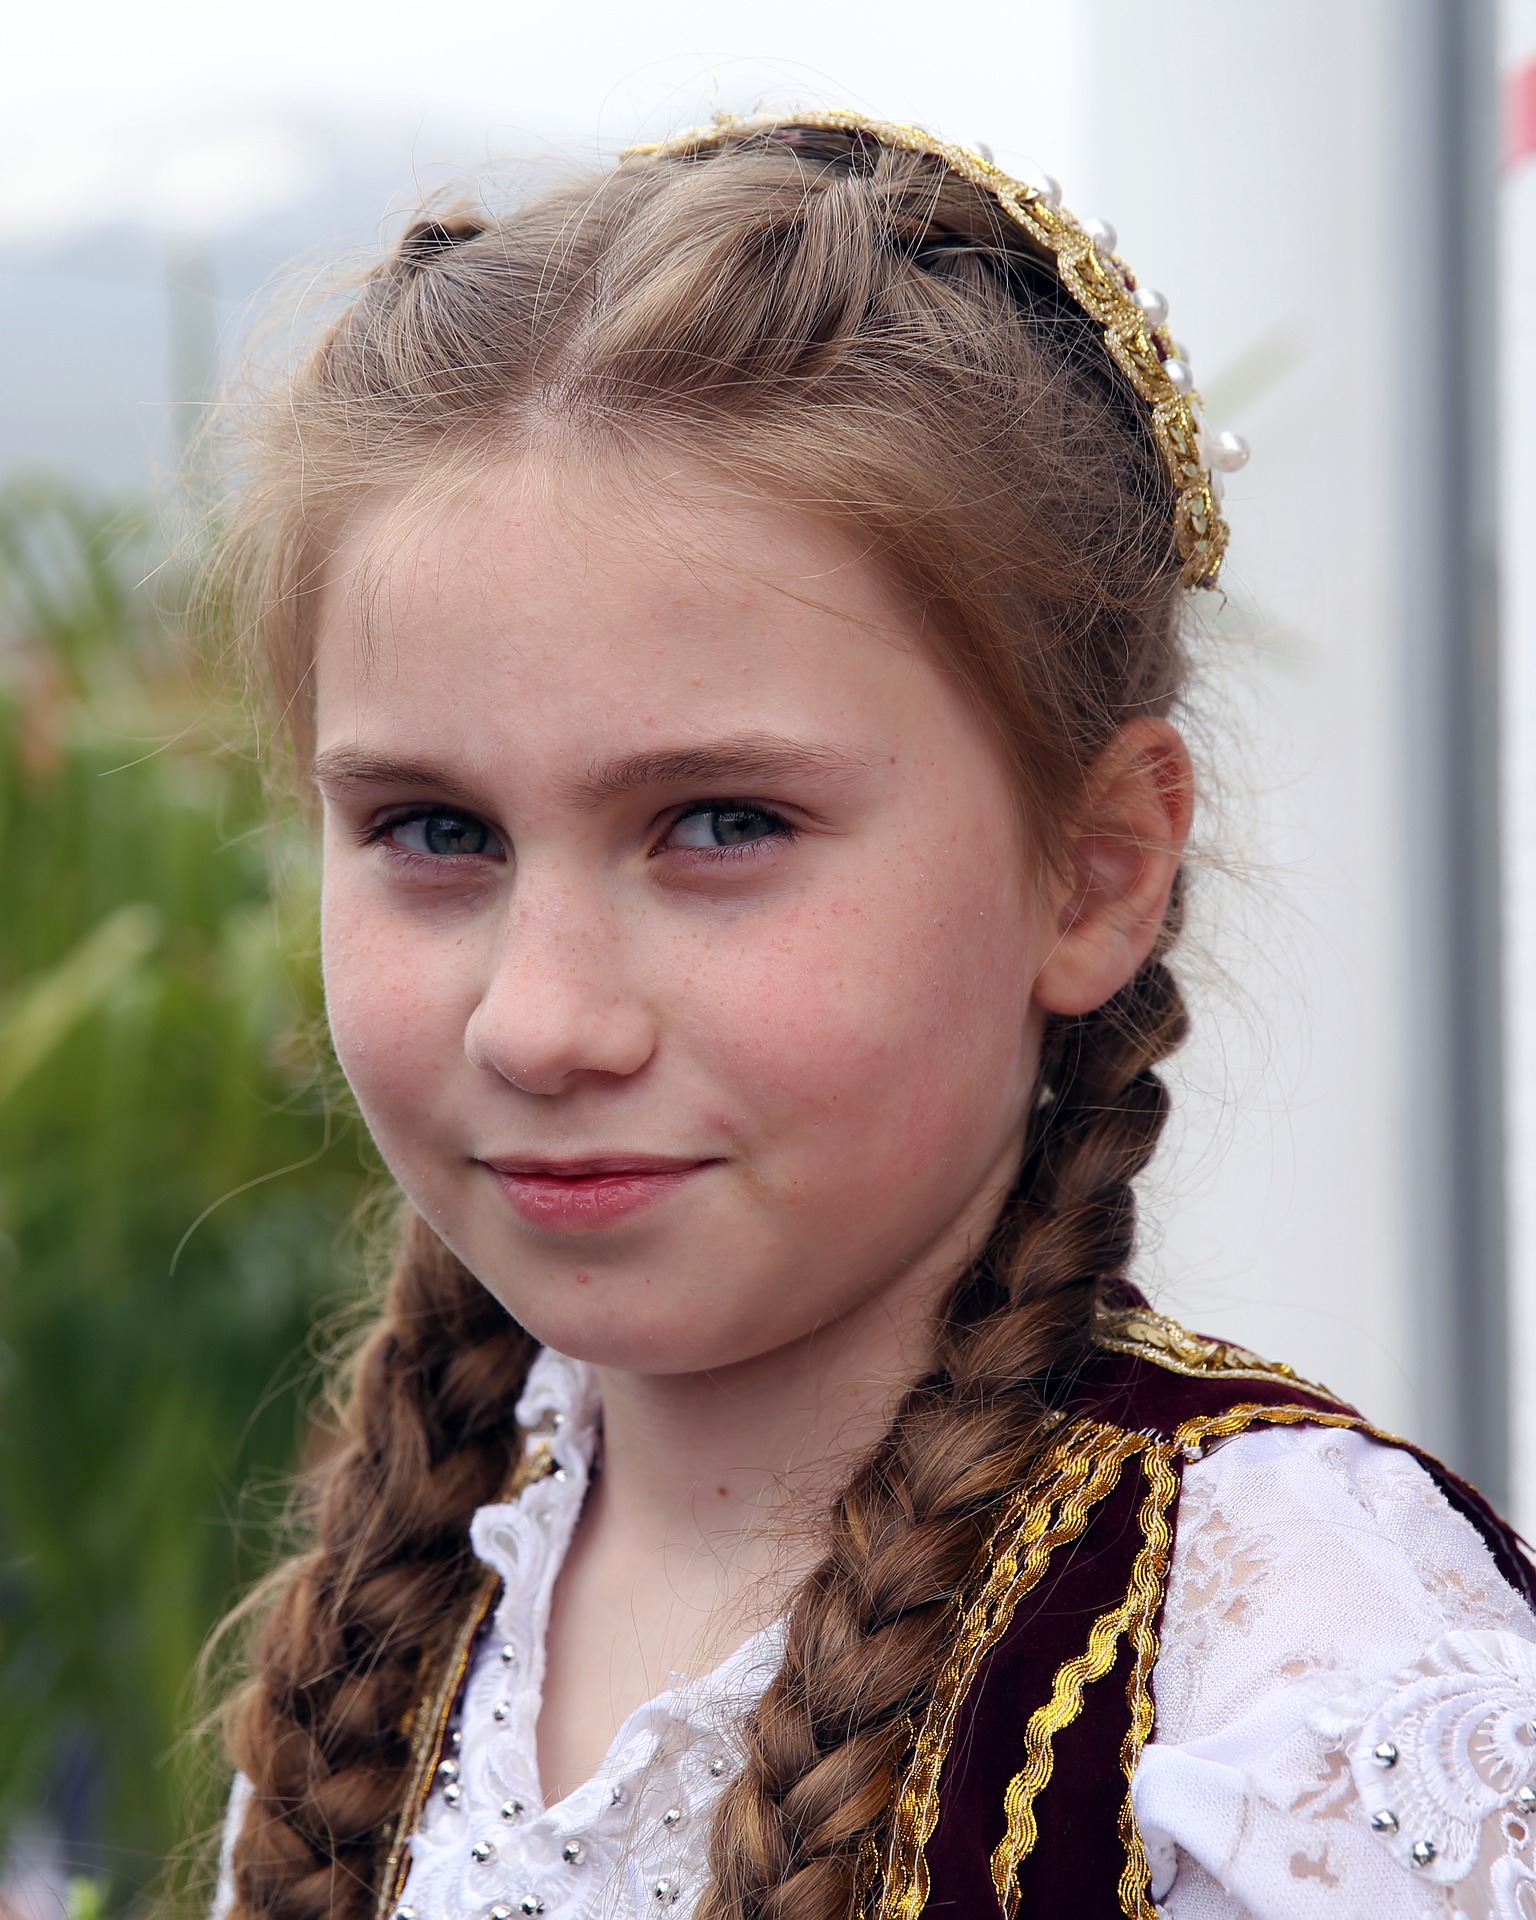 Albanian Girl wearing traditional clothes